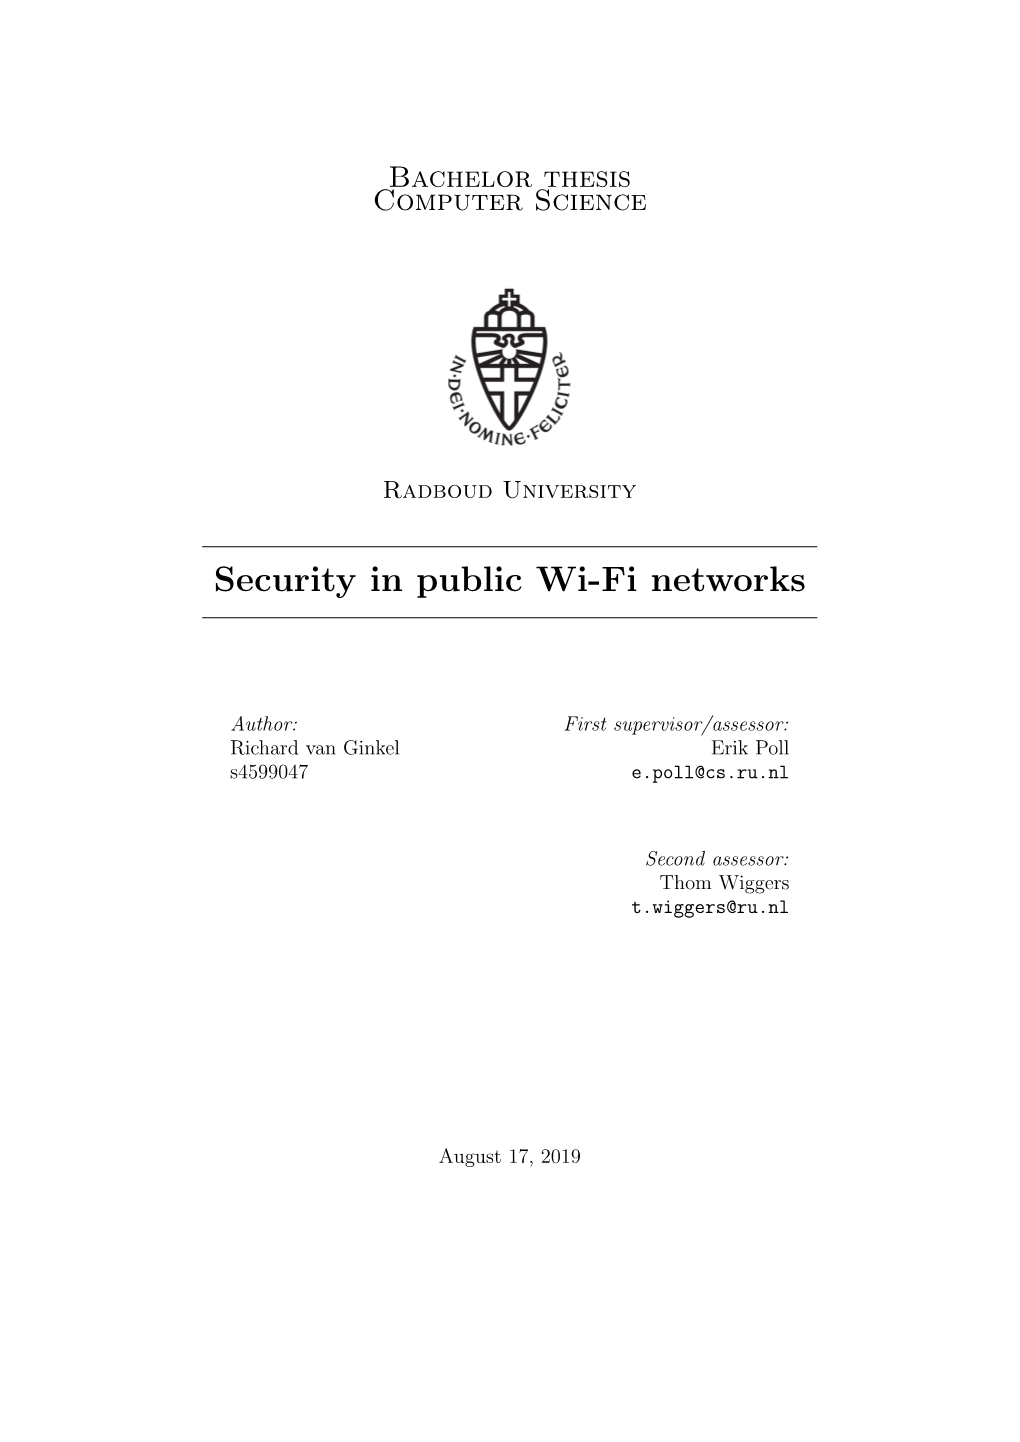 Security in Public Wi-Fi Networks